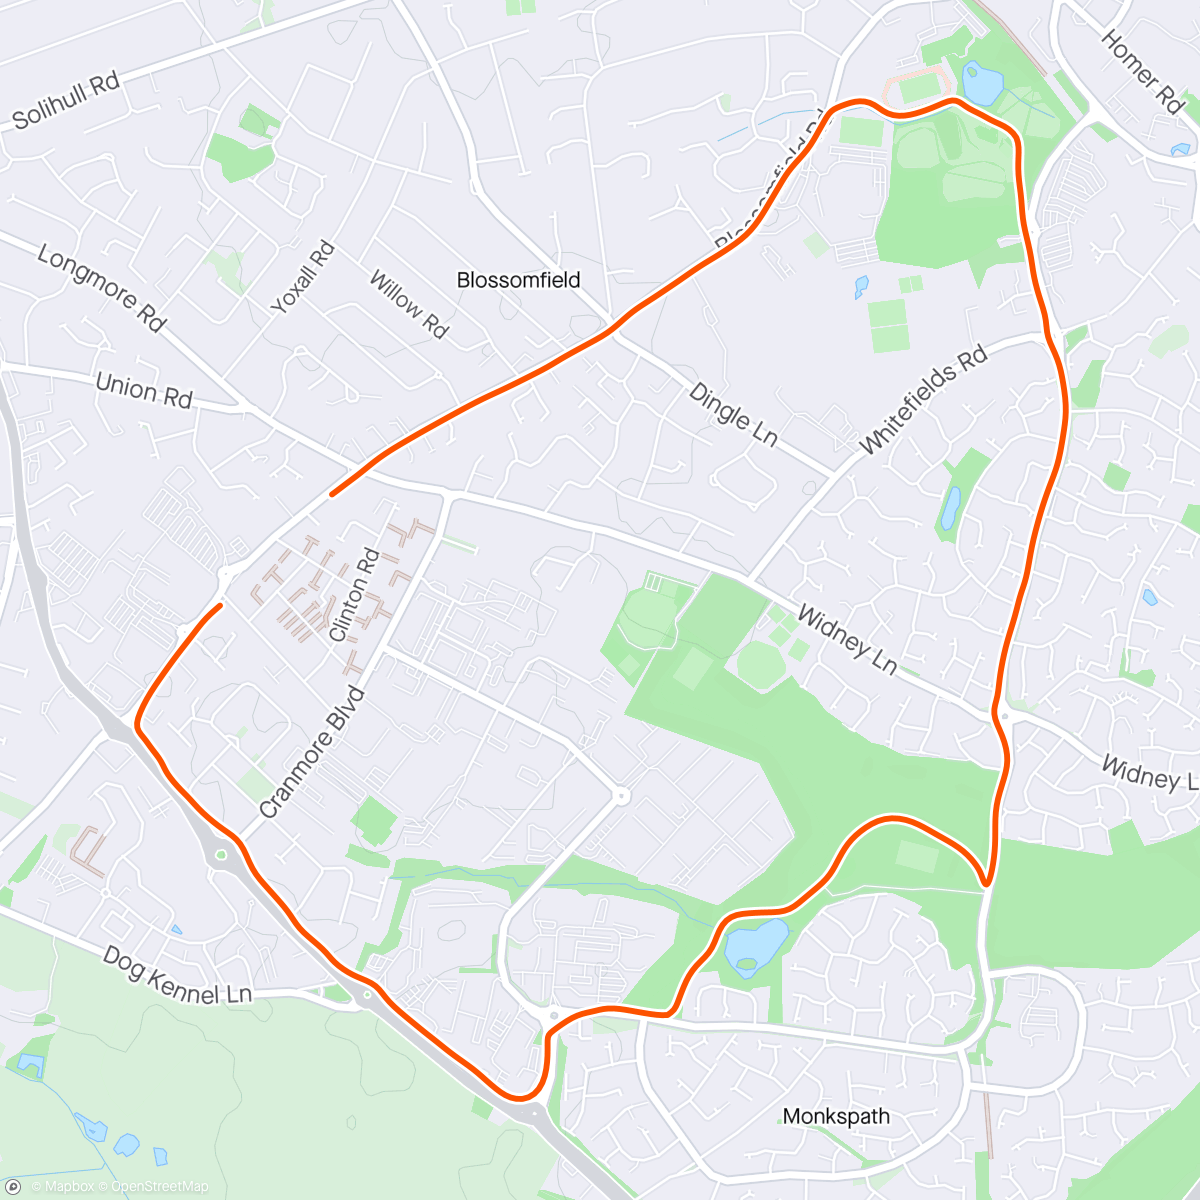 Map of the activity, 4 minutes walking 🚶‍♀️ 52 minutes running 🏃‍♂️ 4 minutes walking 🚶‍♂️ 
To early for Dennis.